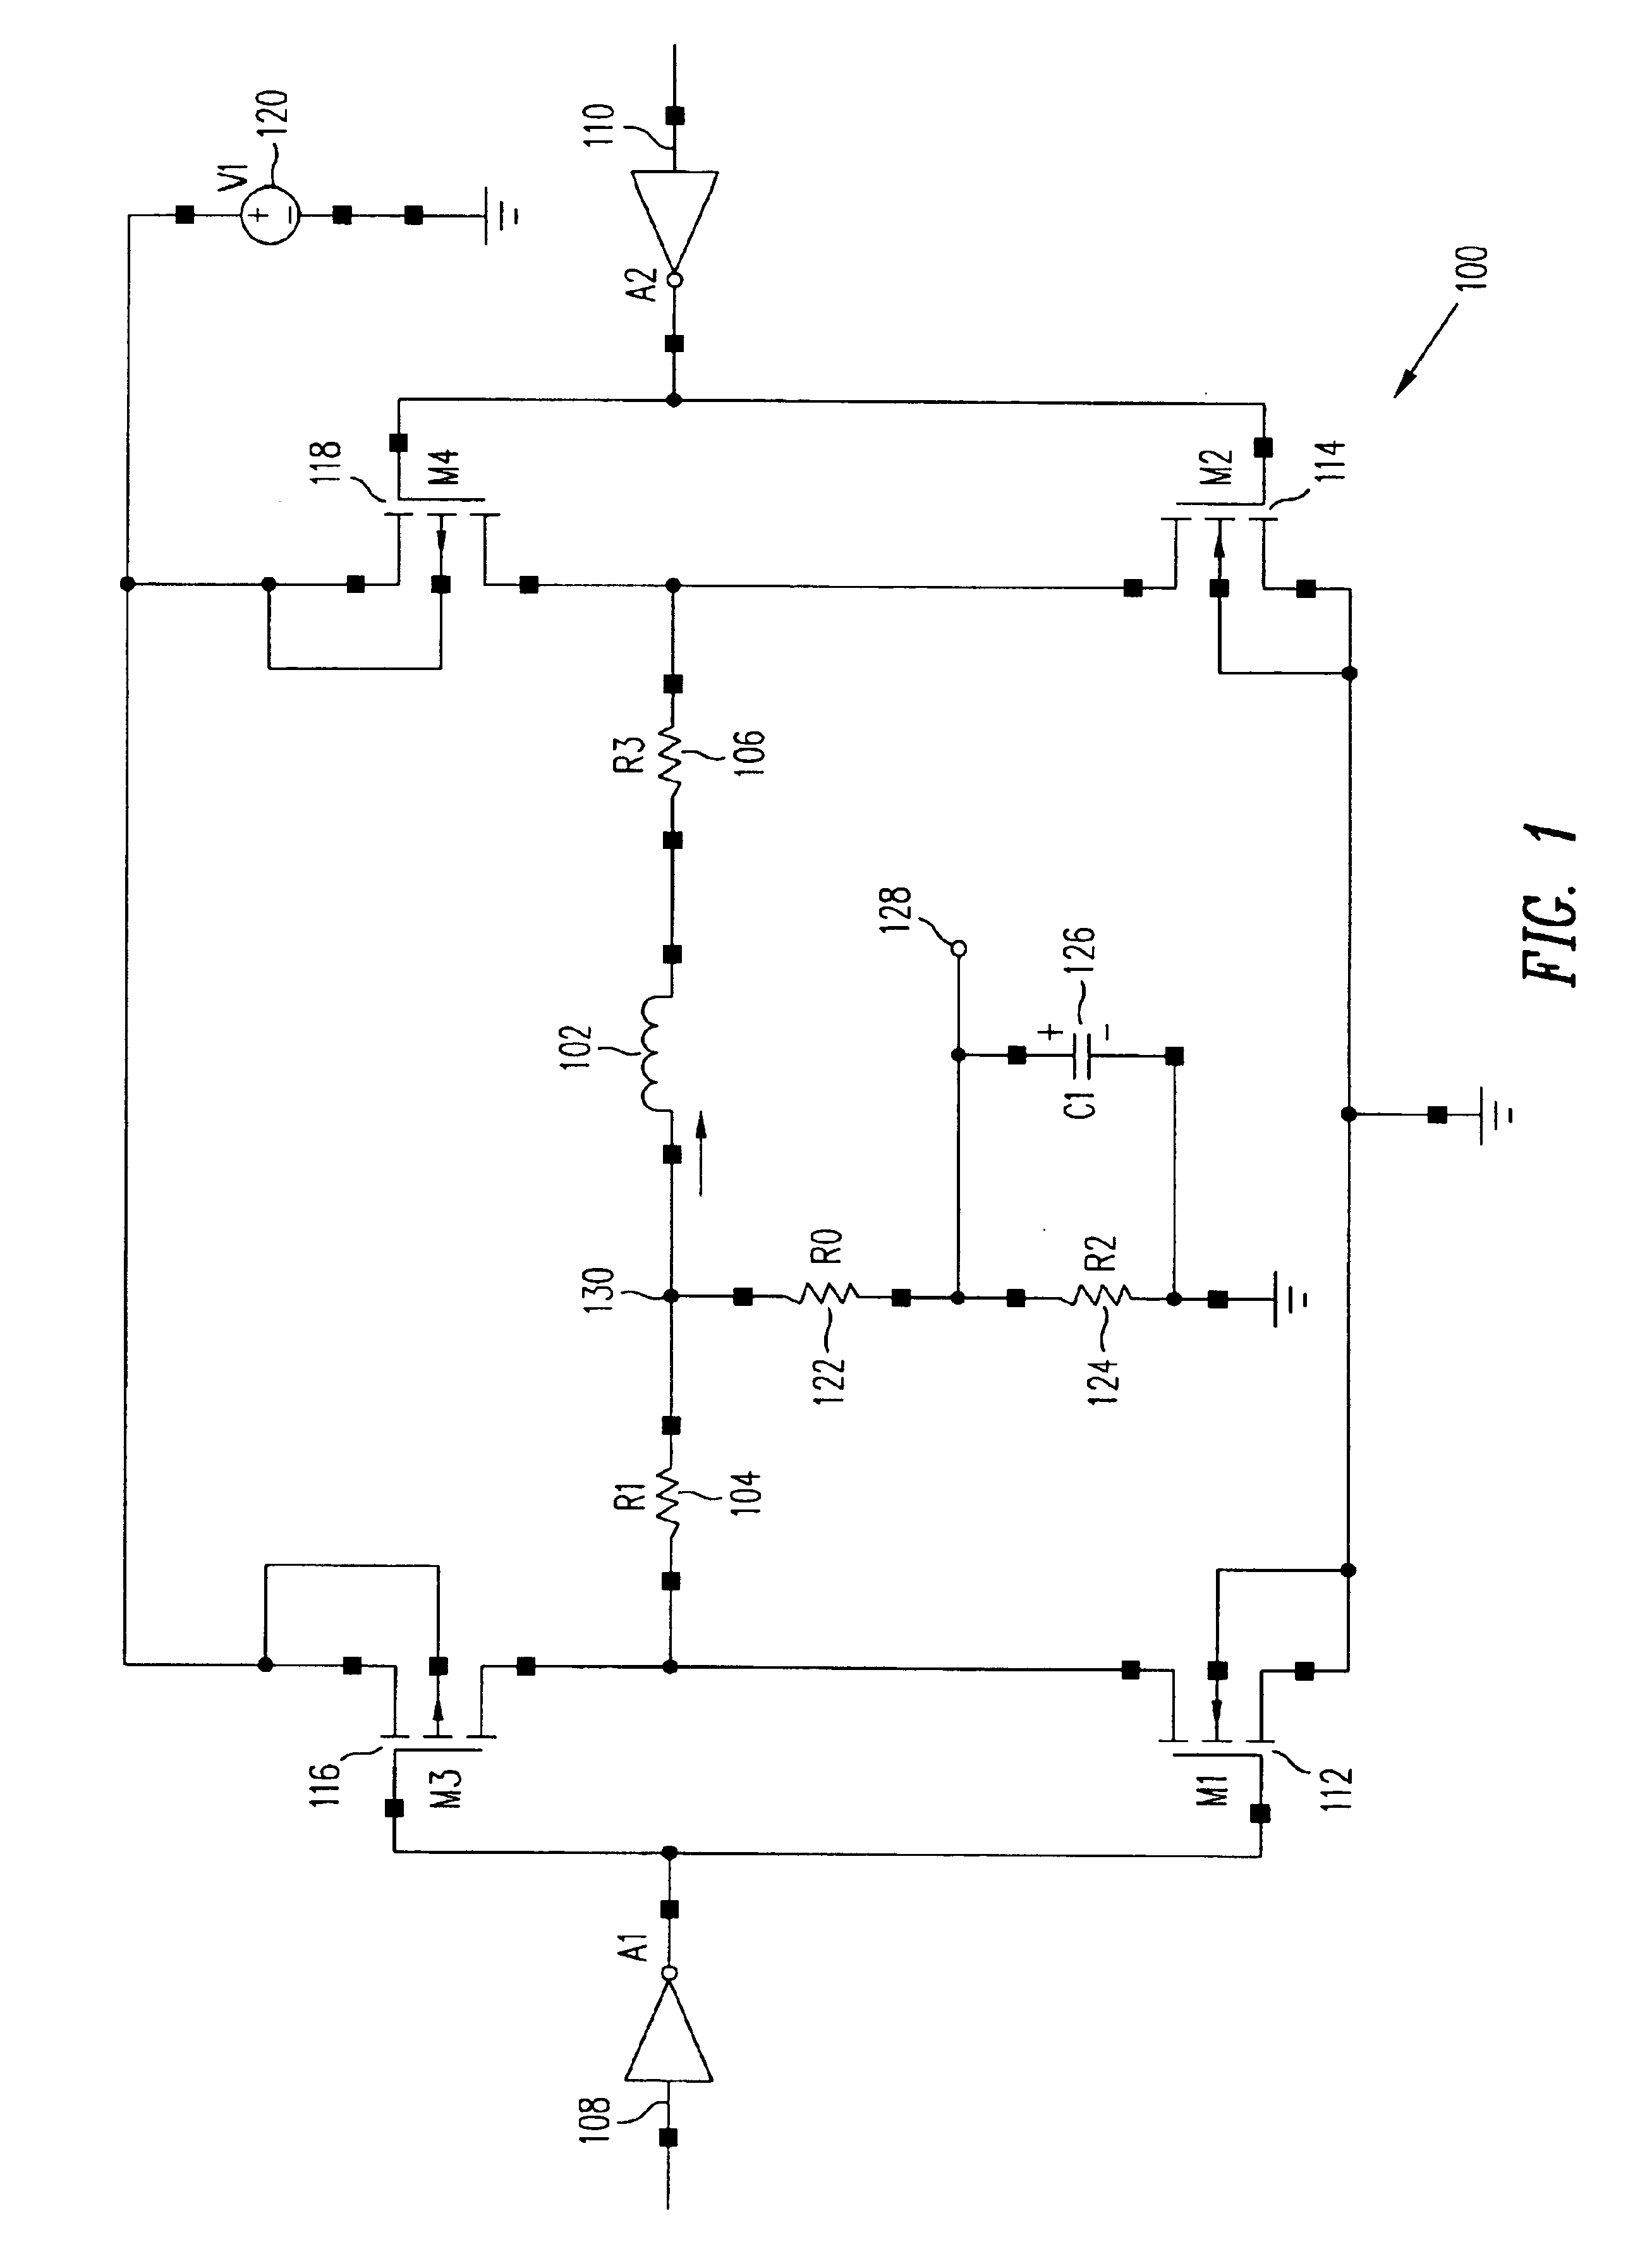 Open head detection circuit and method in a voltage or current mode driver